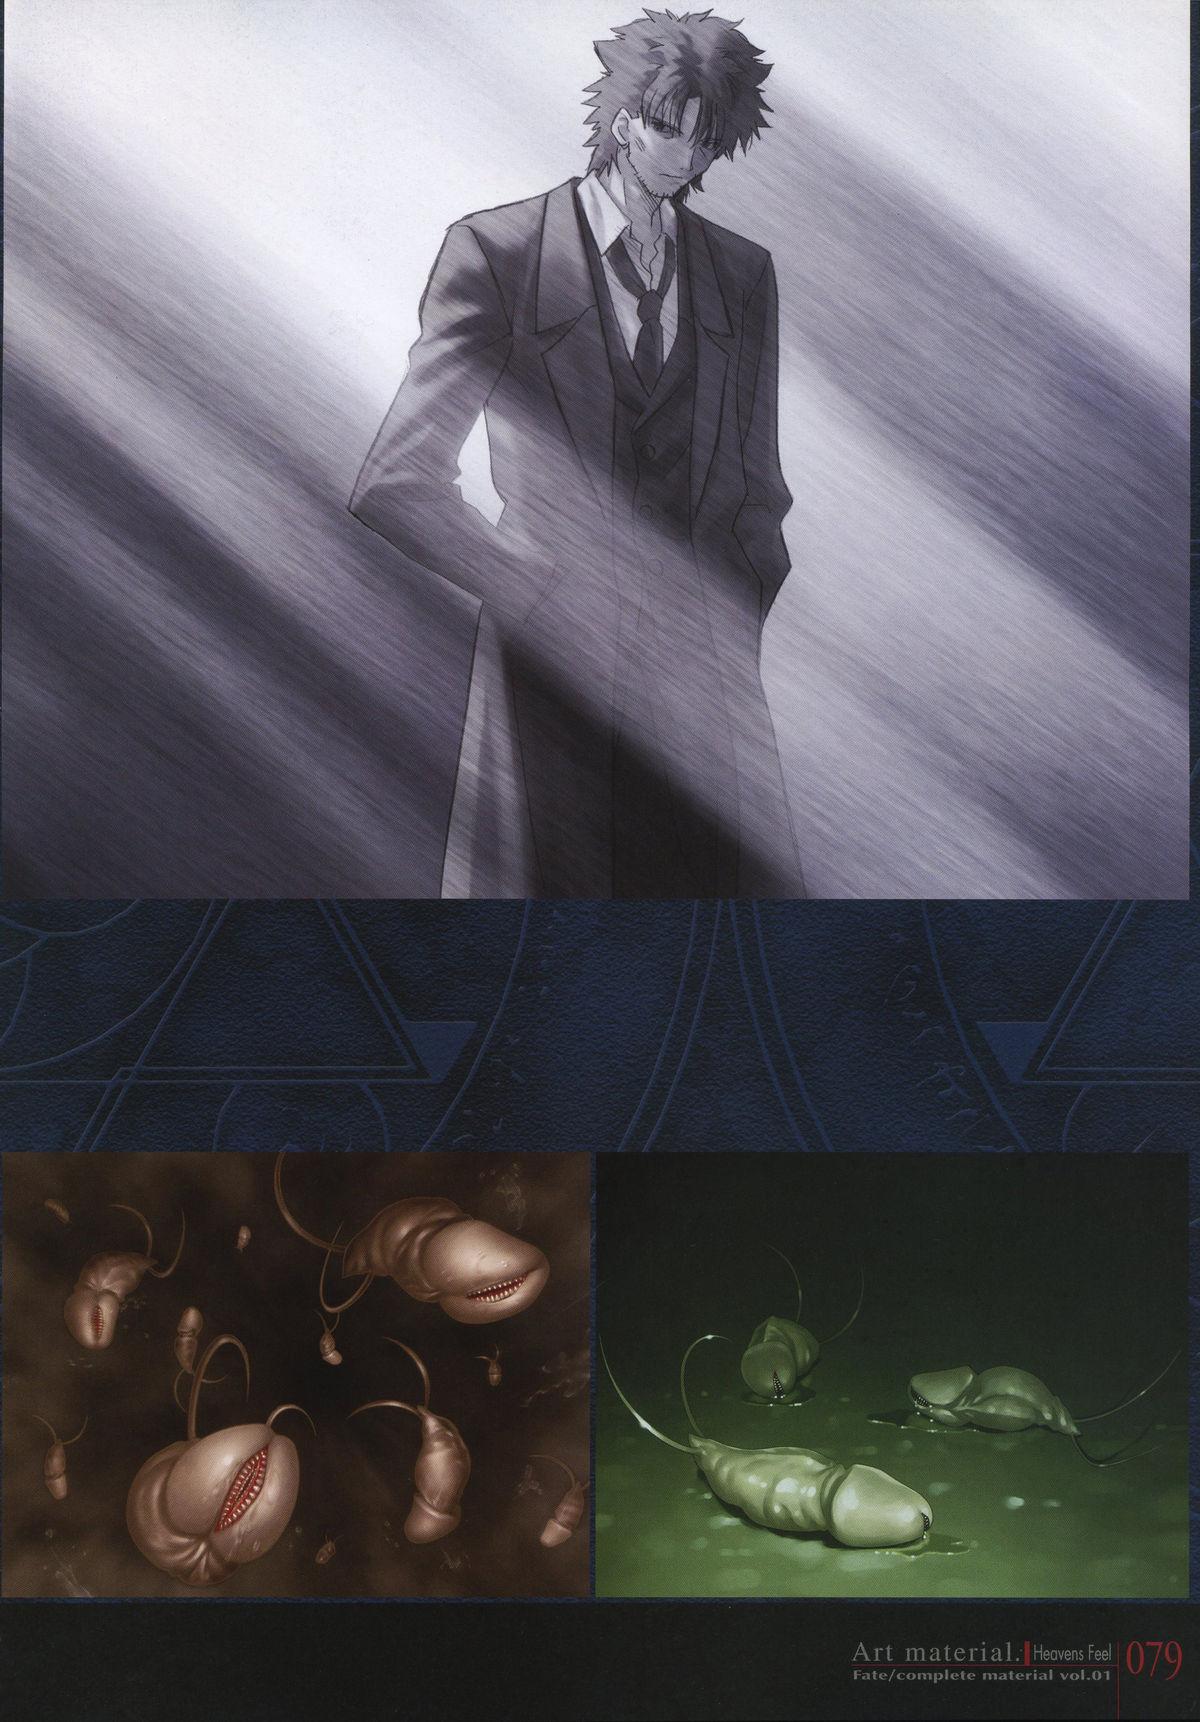 Fate/complete material I - Art material. 83